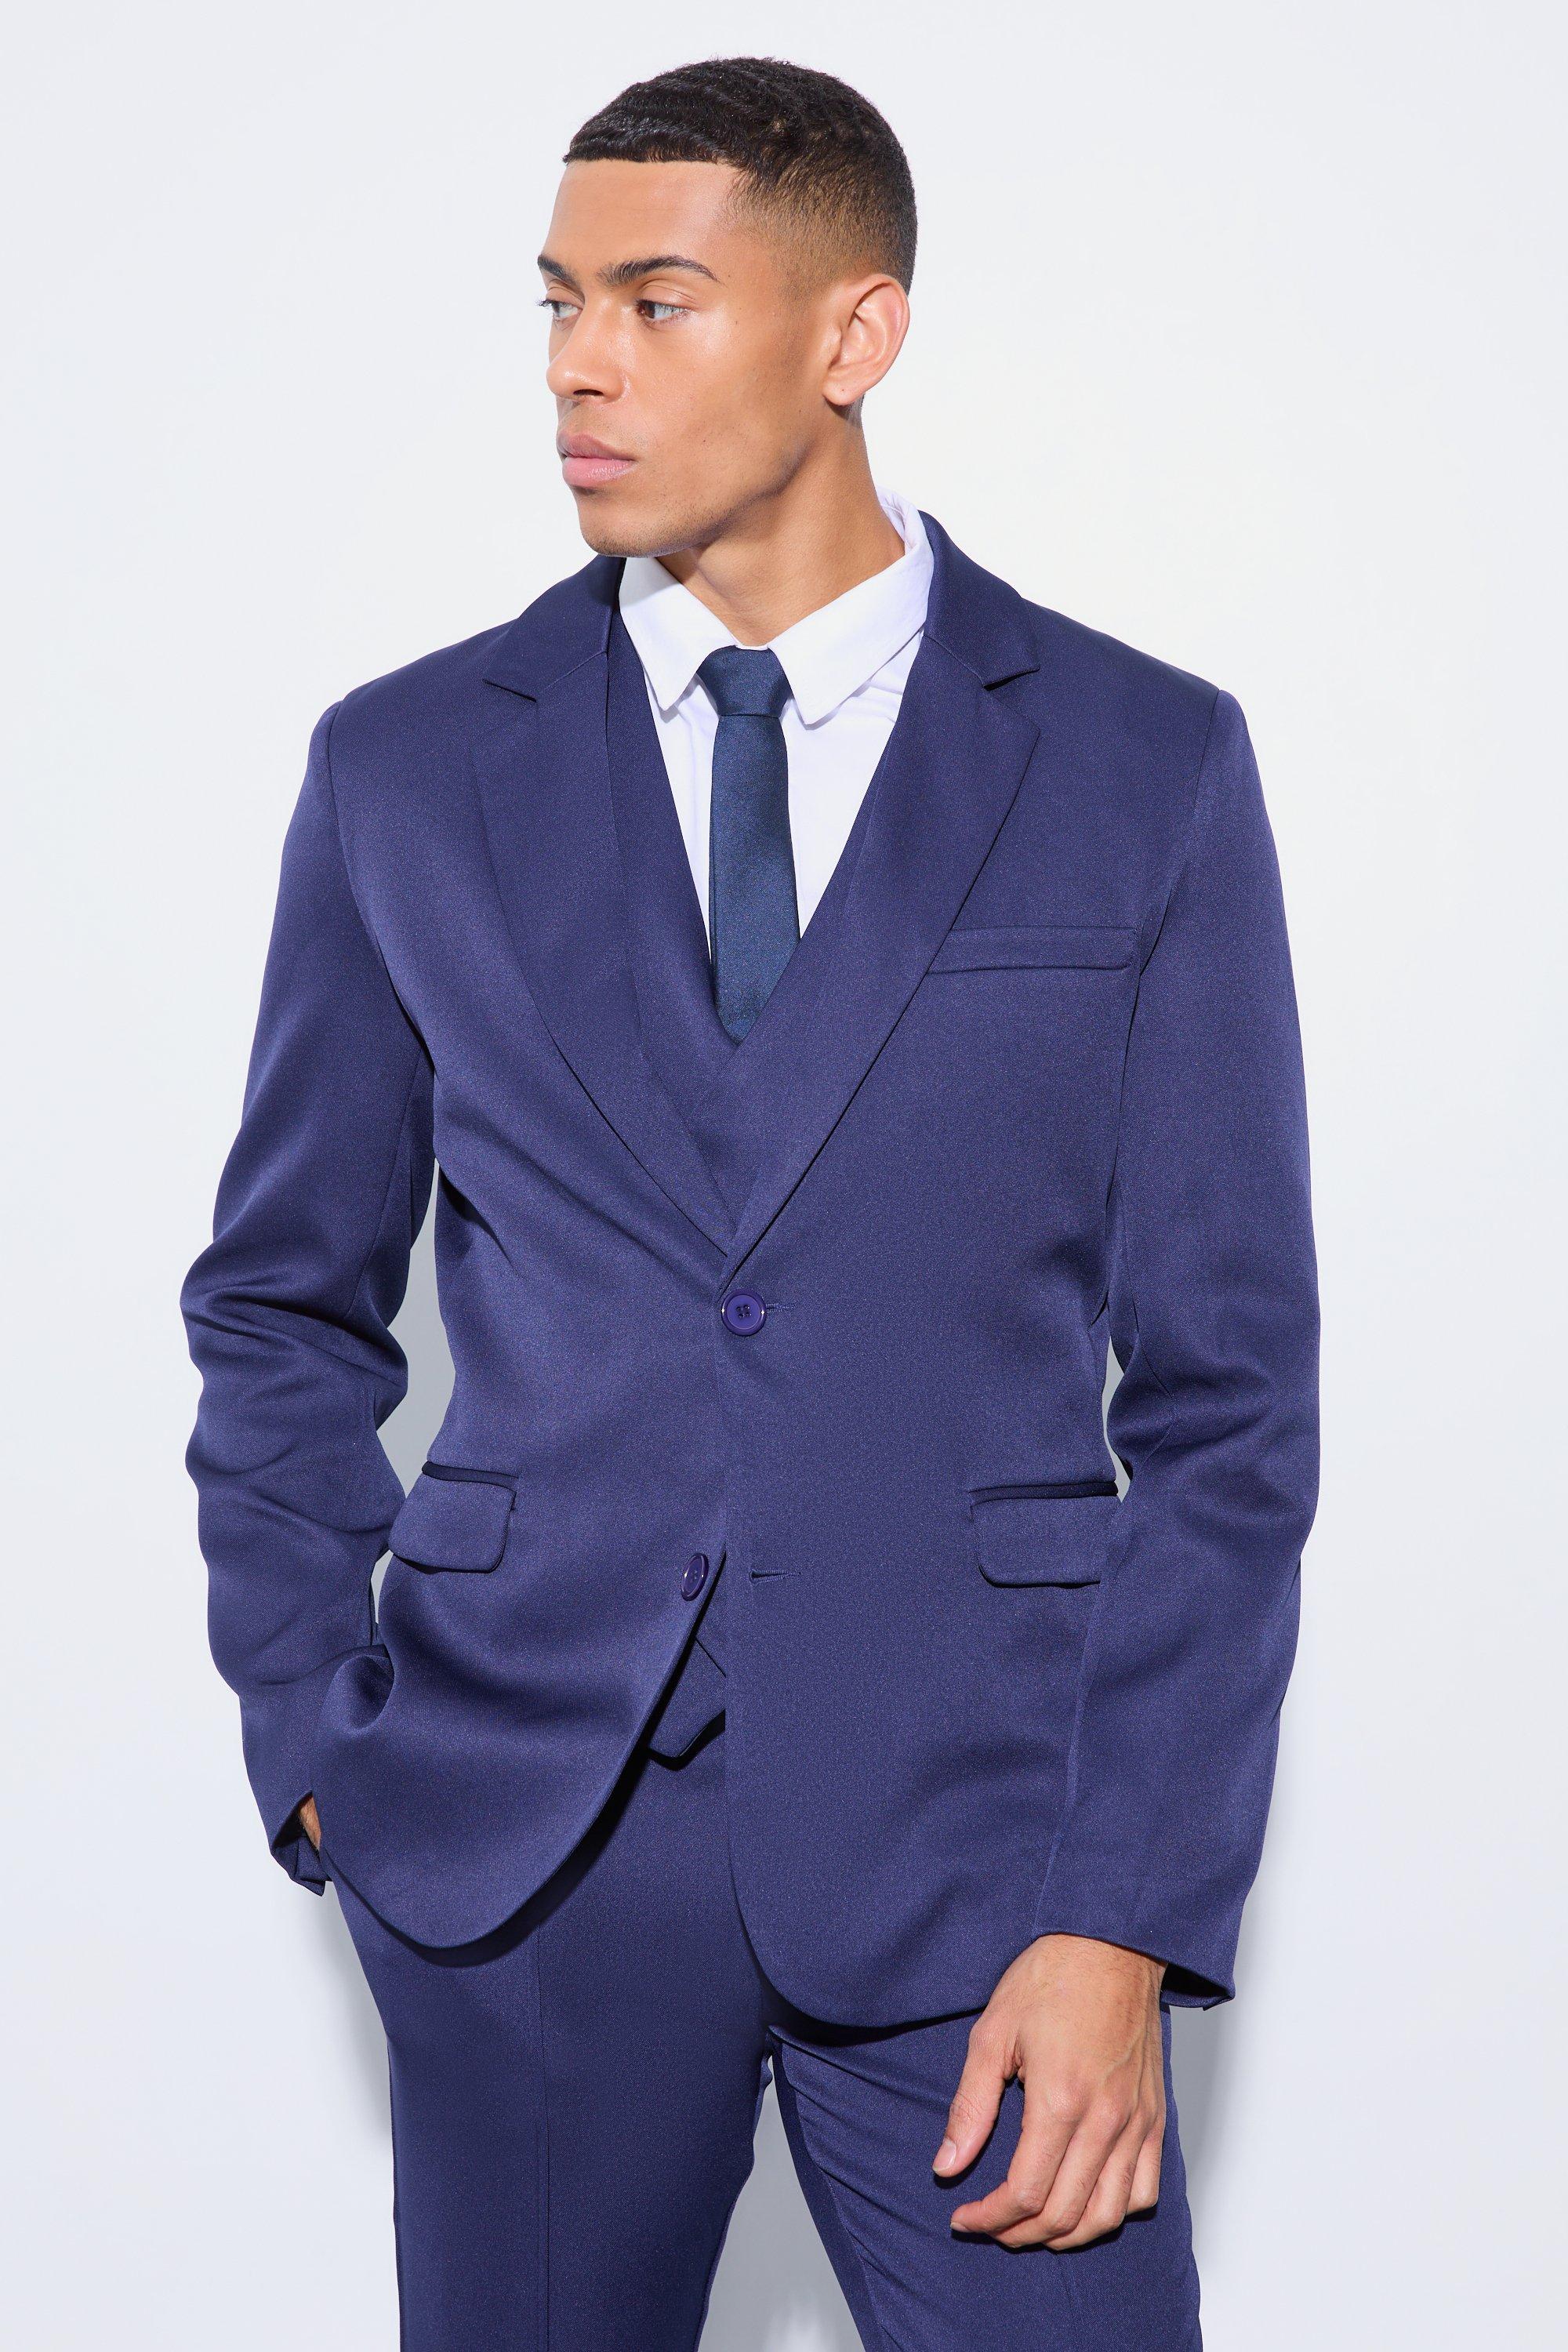 Image of Blazer a monopetto Slim Fit, Navy